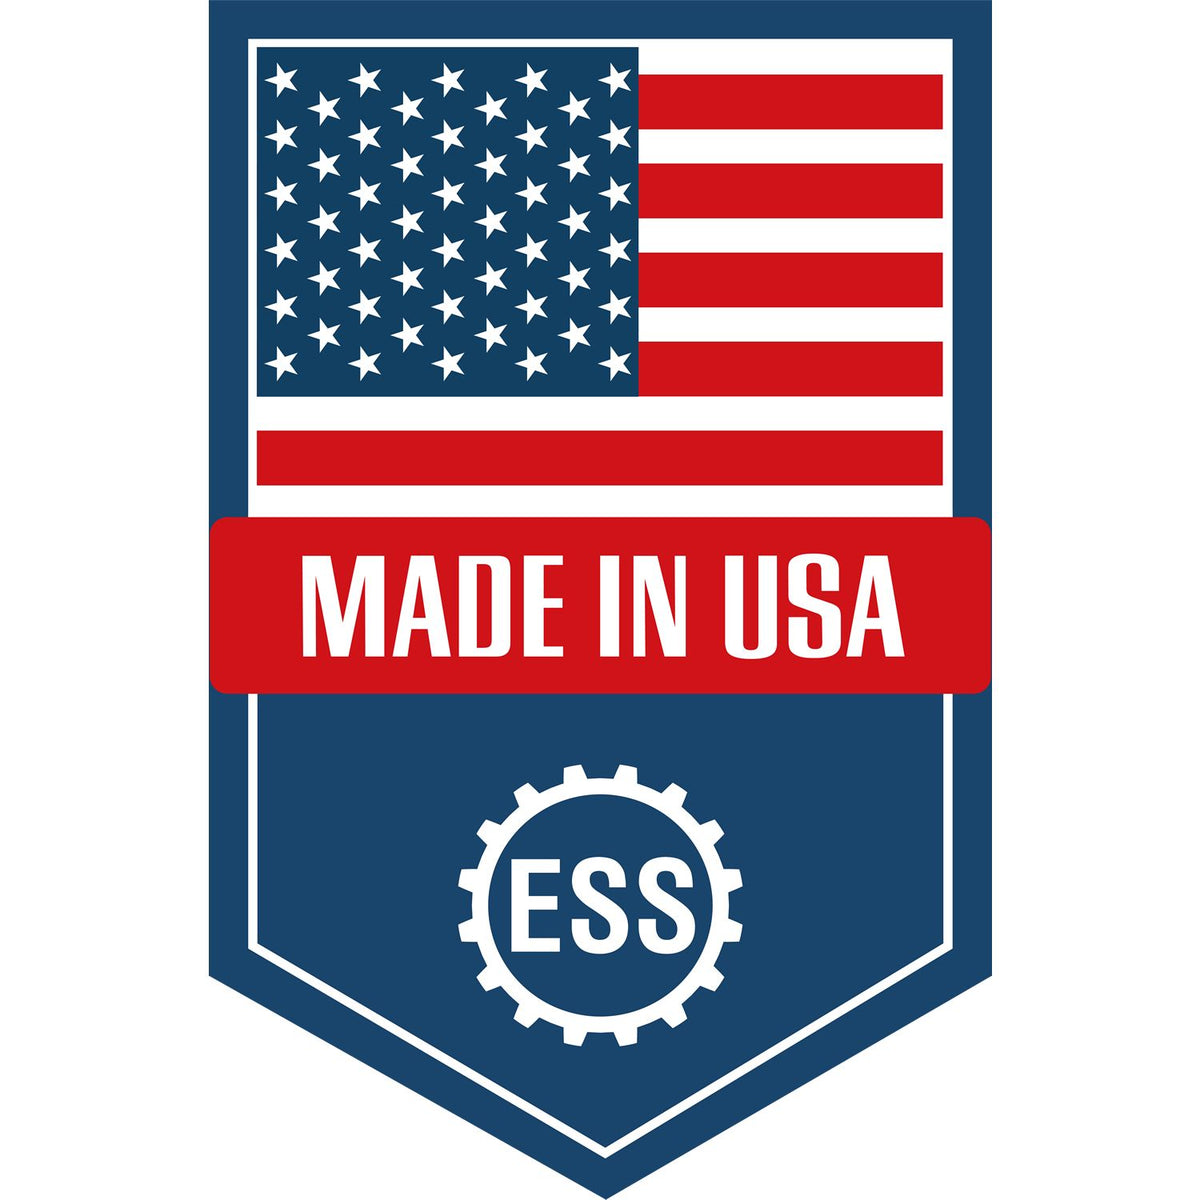 An icon or graphic with an American flag and text reading Made in USA for the Gift Montana Landscape Architect Seal